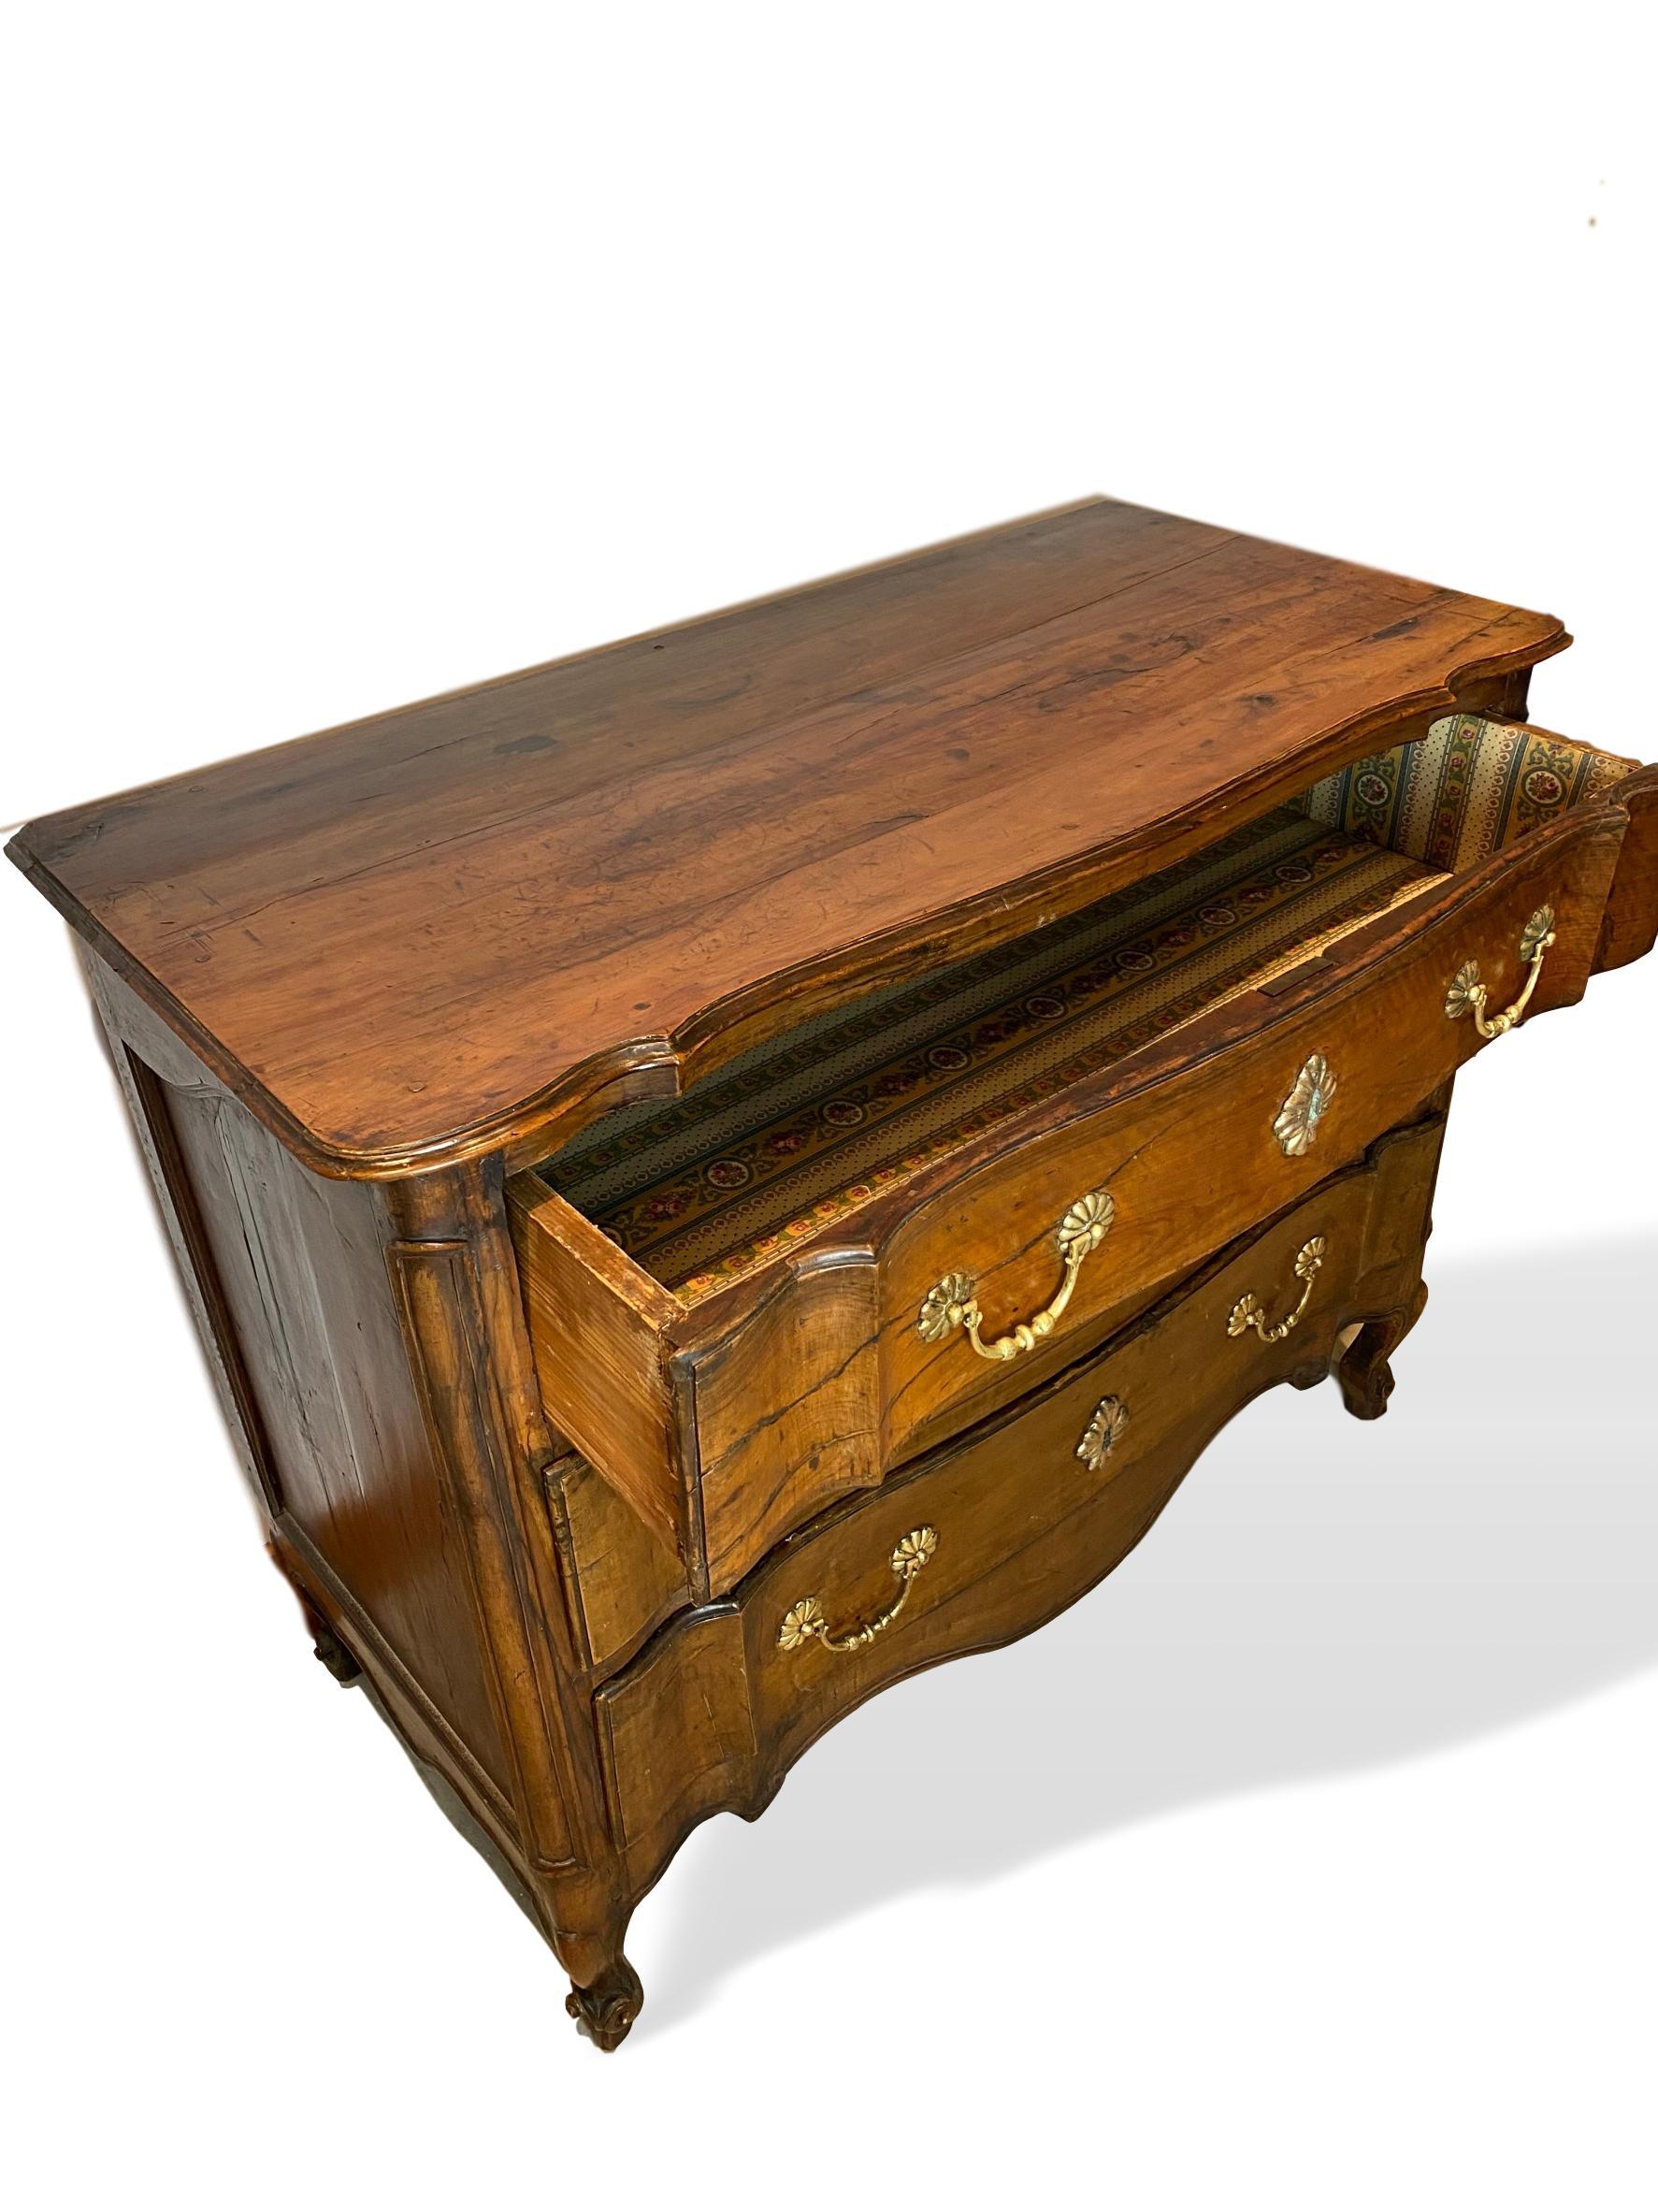 Hand-Crafted 18th Century Louis XV Carved Cherry Commode, French, circa 1750